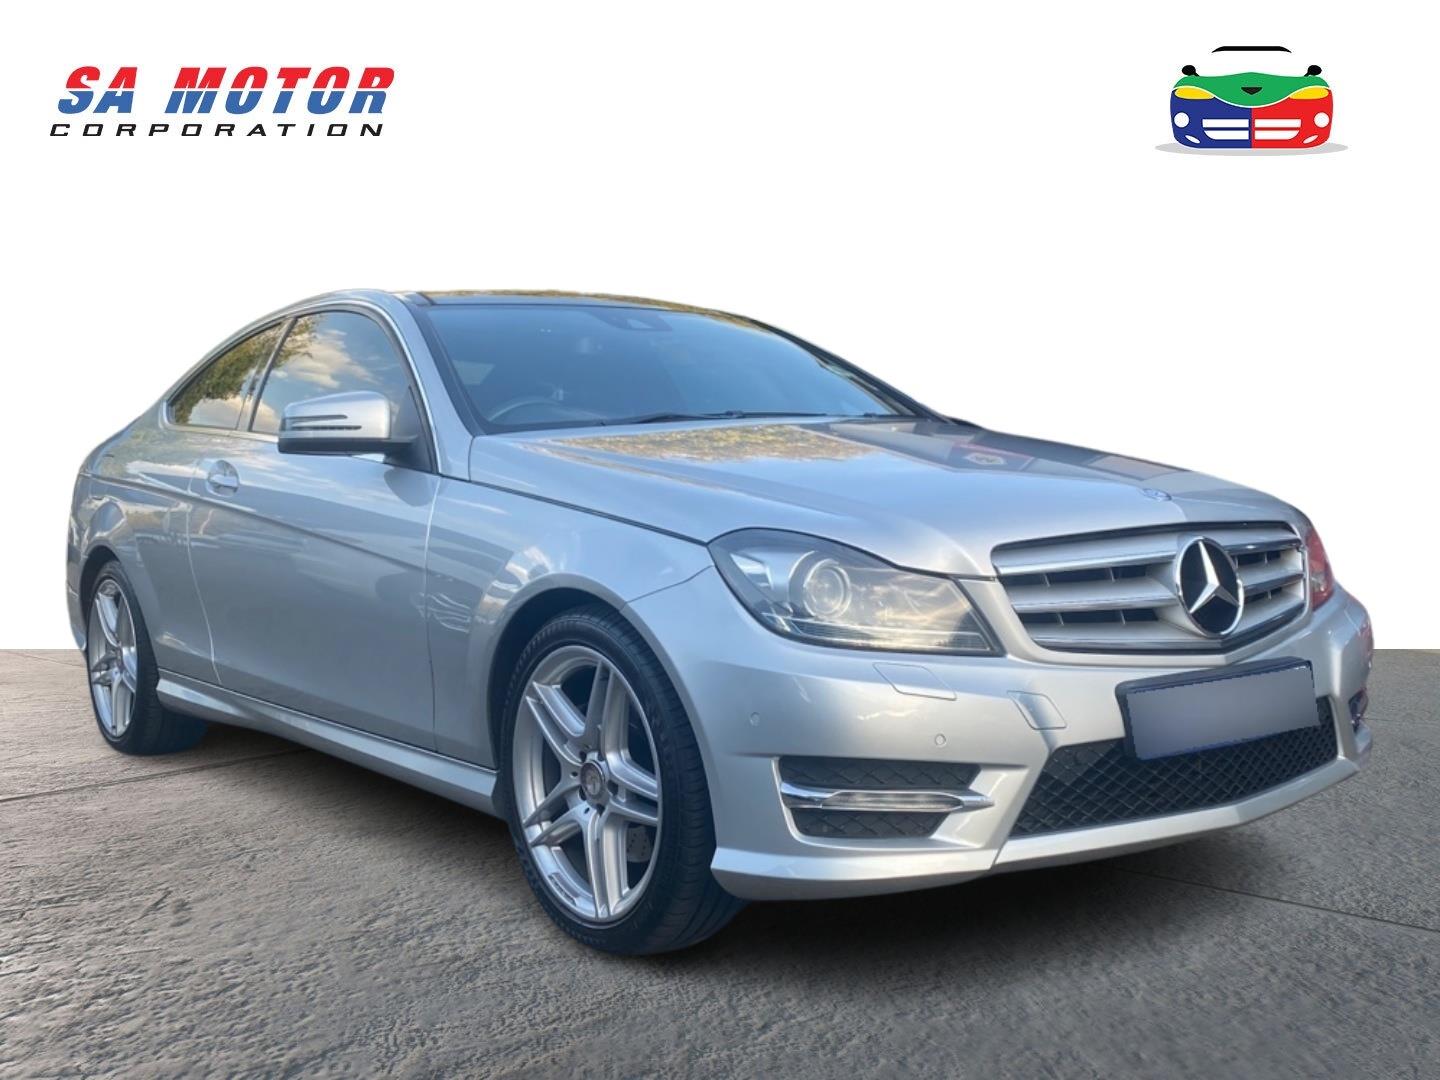 2013 Mercedes-Benz C-Class Coupe C 350 7G-Tronic for sale - 327466